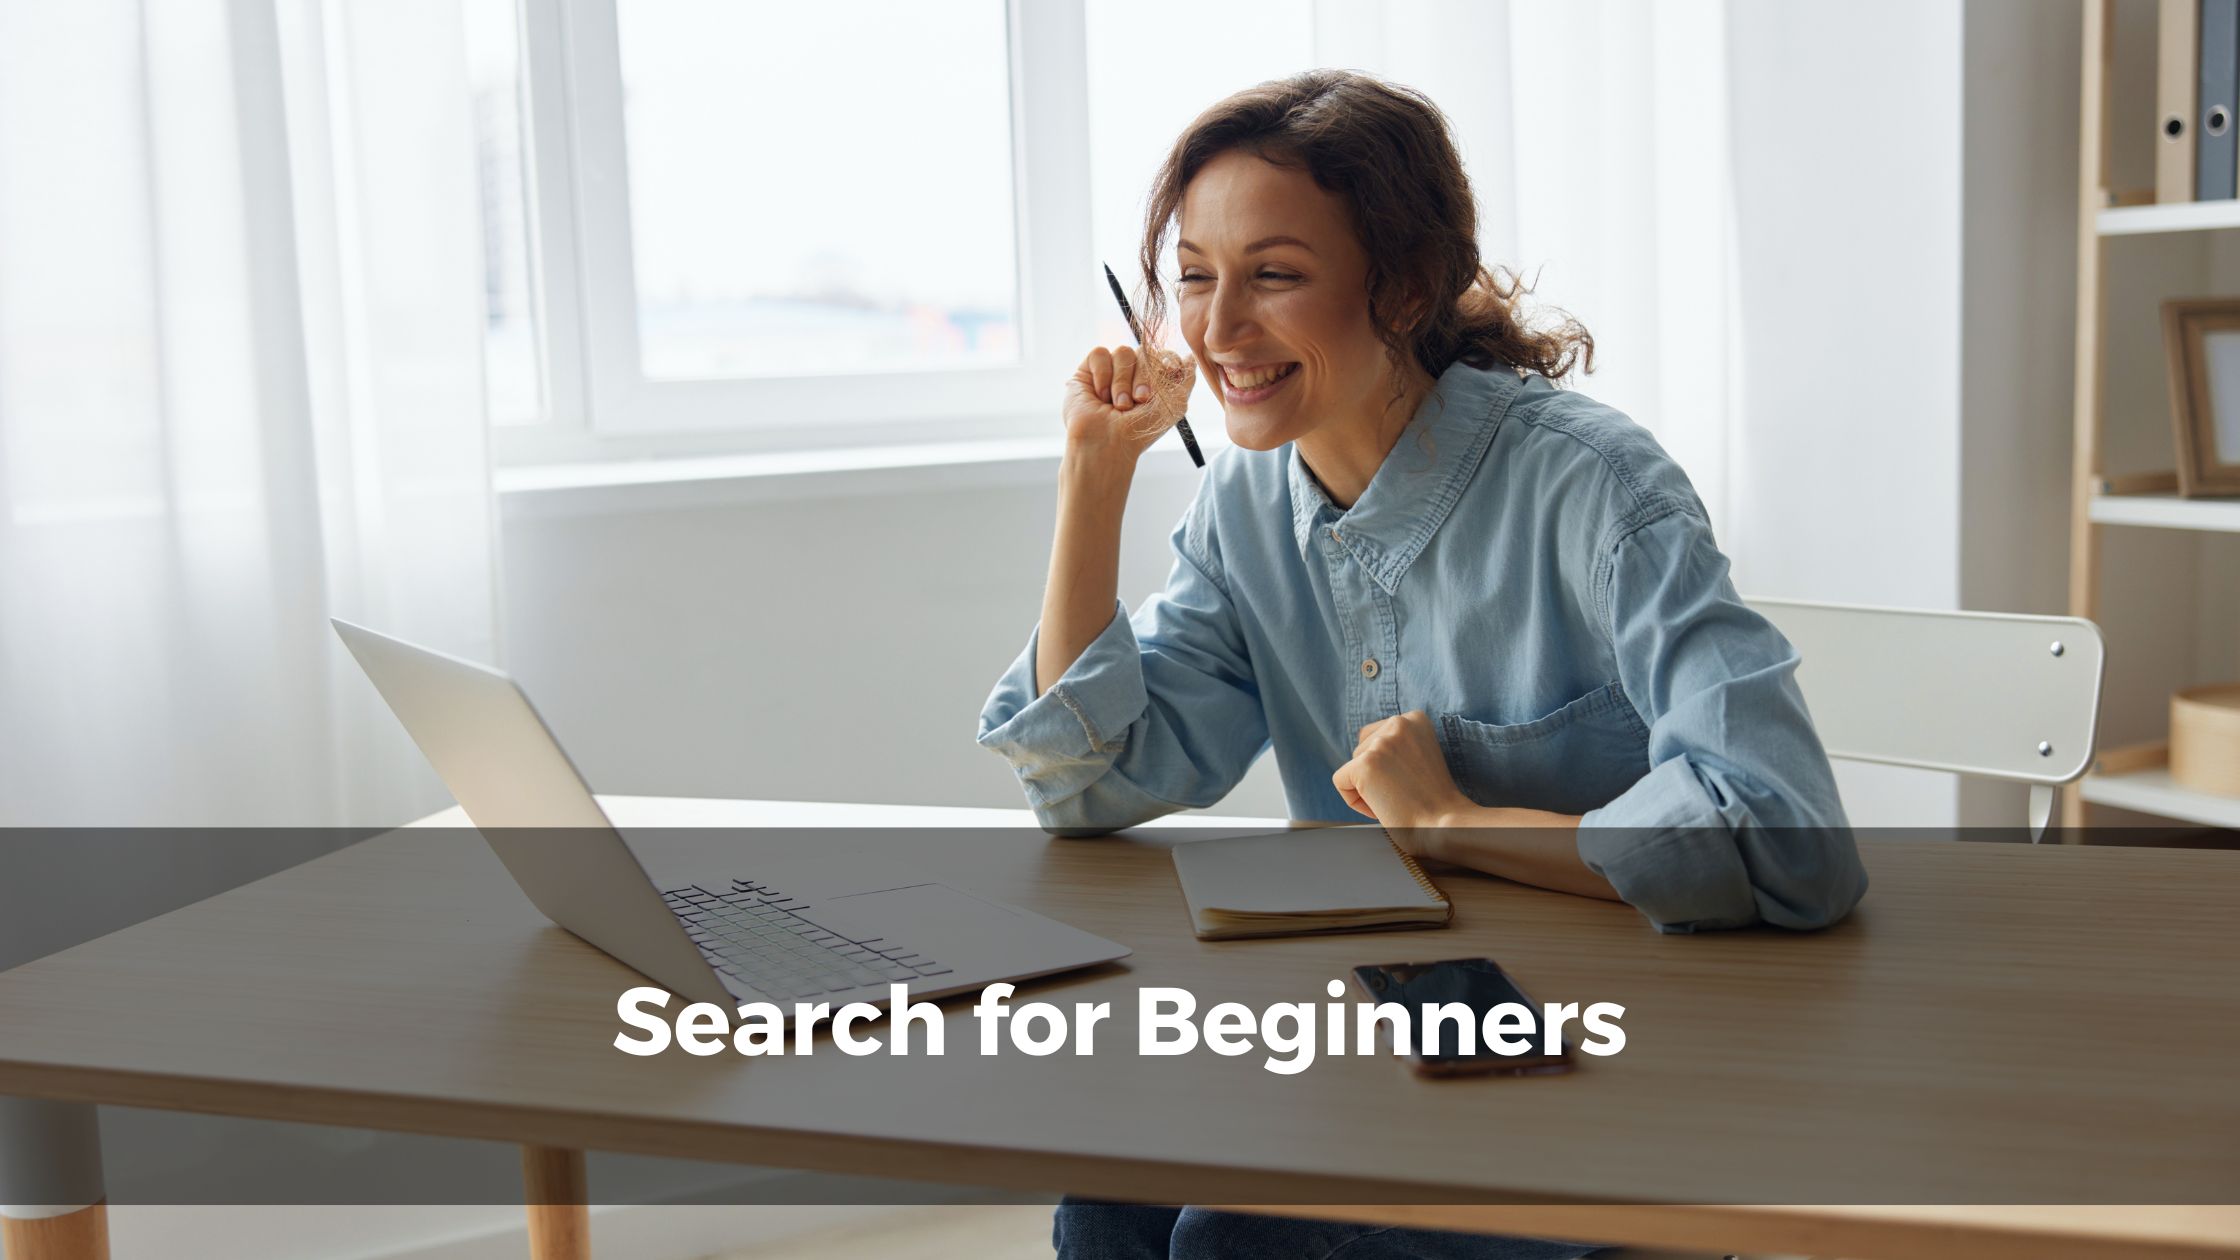 Search for Beginners - Google's official Animated Videos